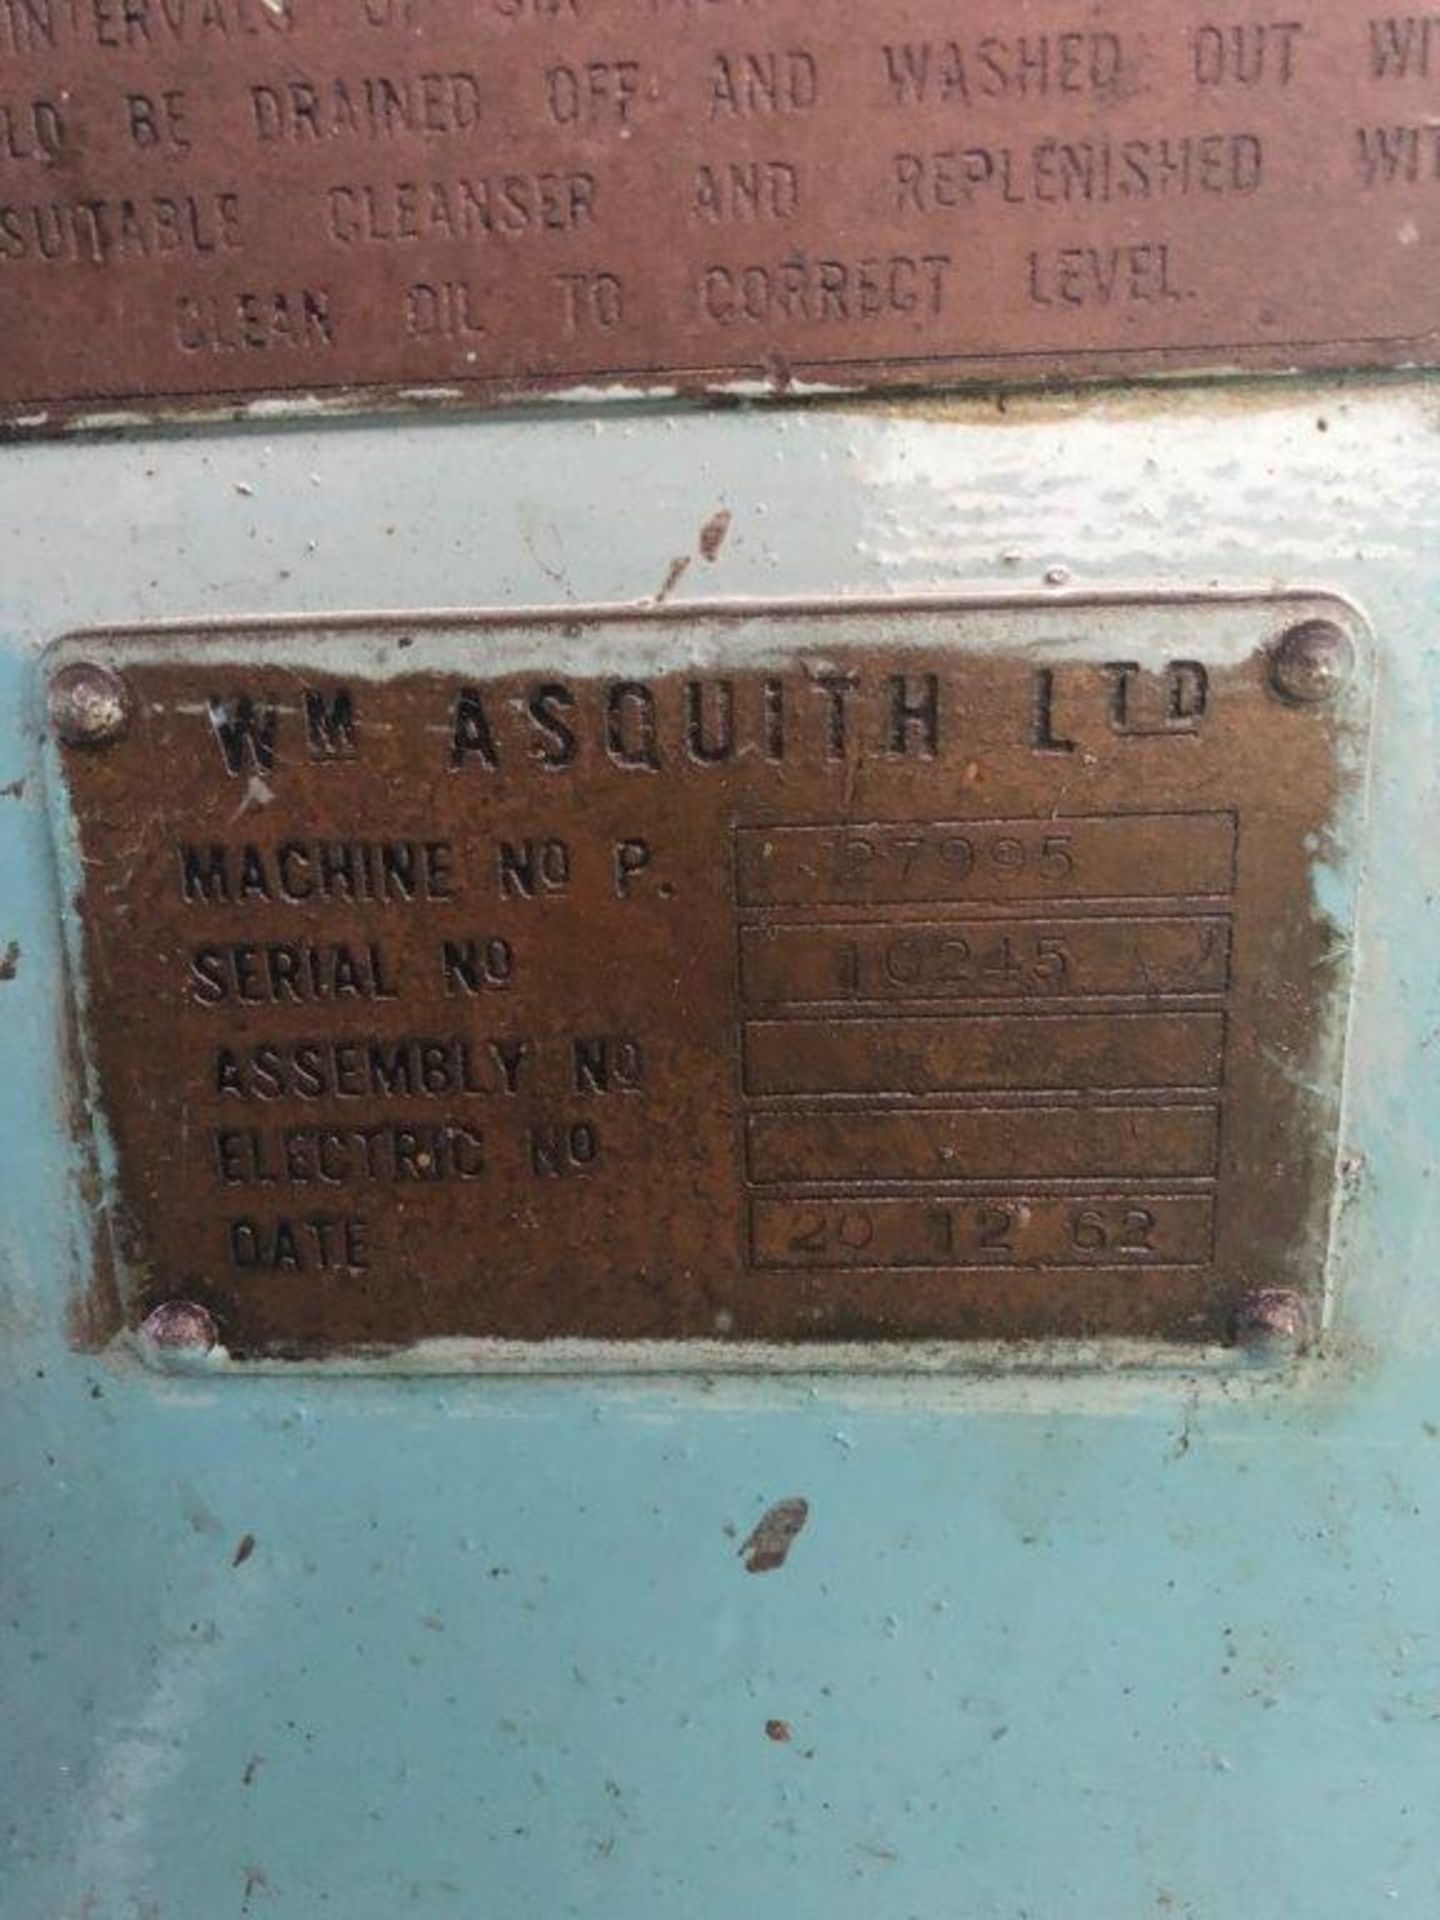 Asquith 6' Powered Rotary Table - Image 11 of 11